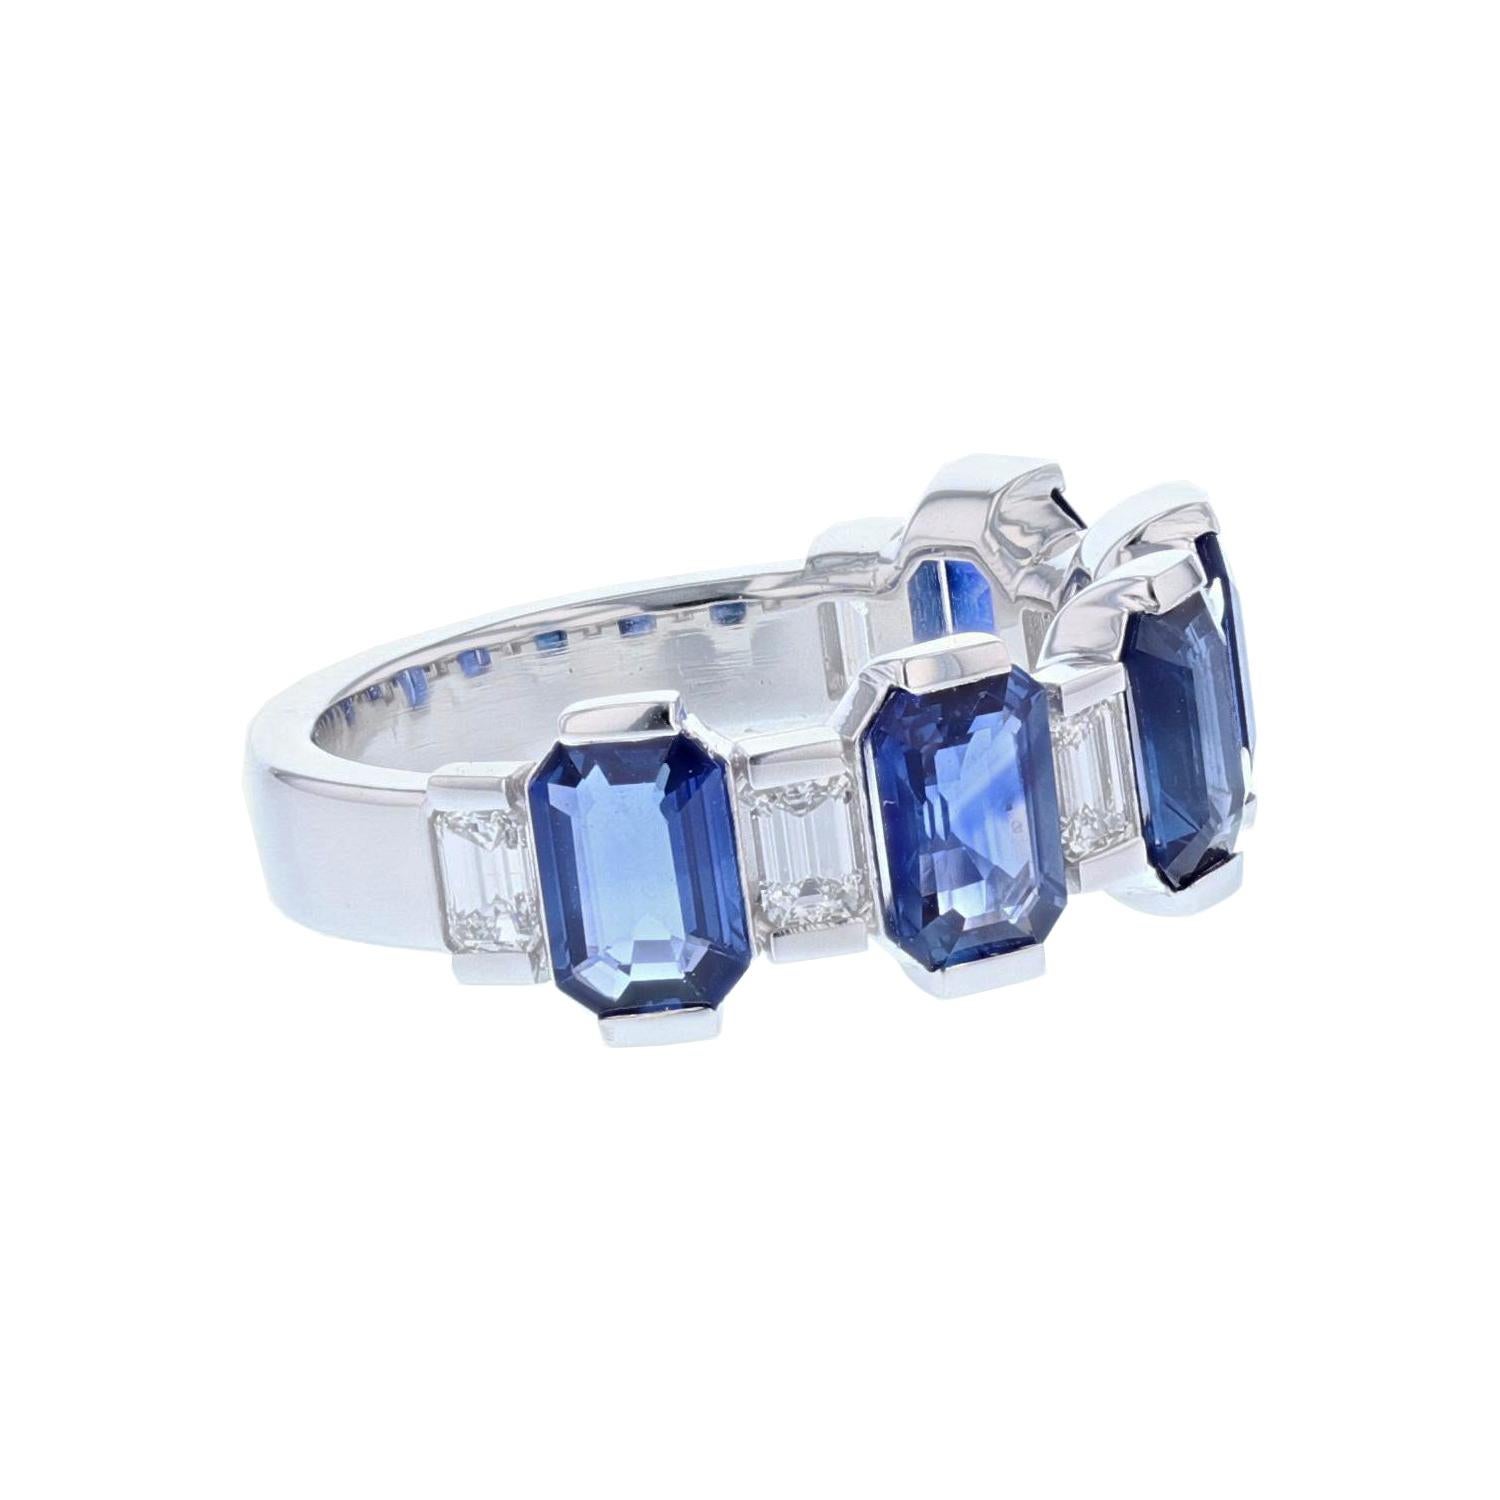 This ring is made in 14 karat white gold featuring five Emerald cut, channel set Blue Sapphires weighing 3.19 carats and six Baguette cut,  prong set Diamonds weighing 0.58 carats and twelve Round cut, prong set Diamonds weighing 0.44 carats with a